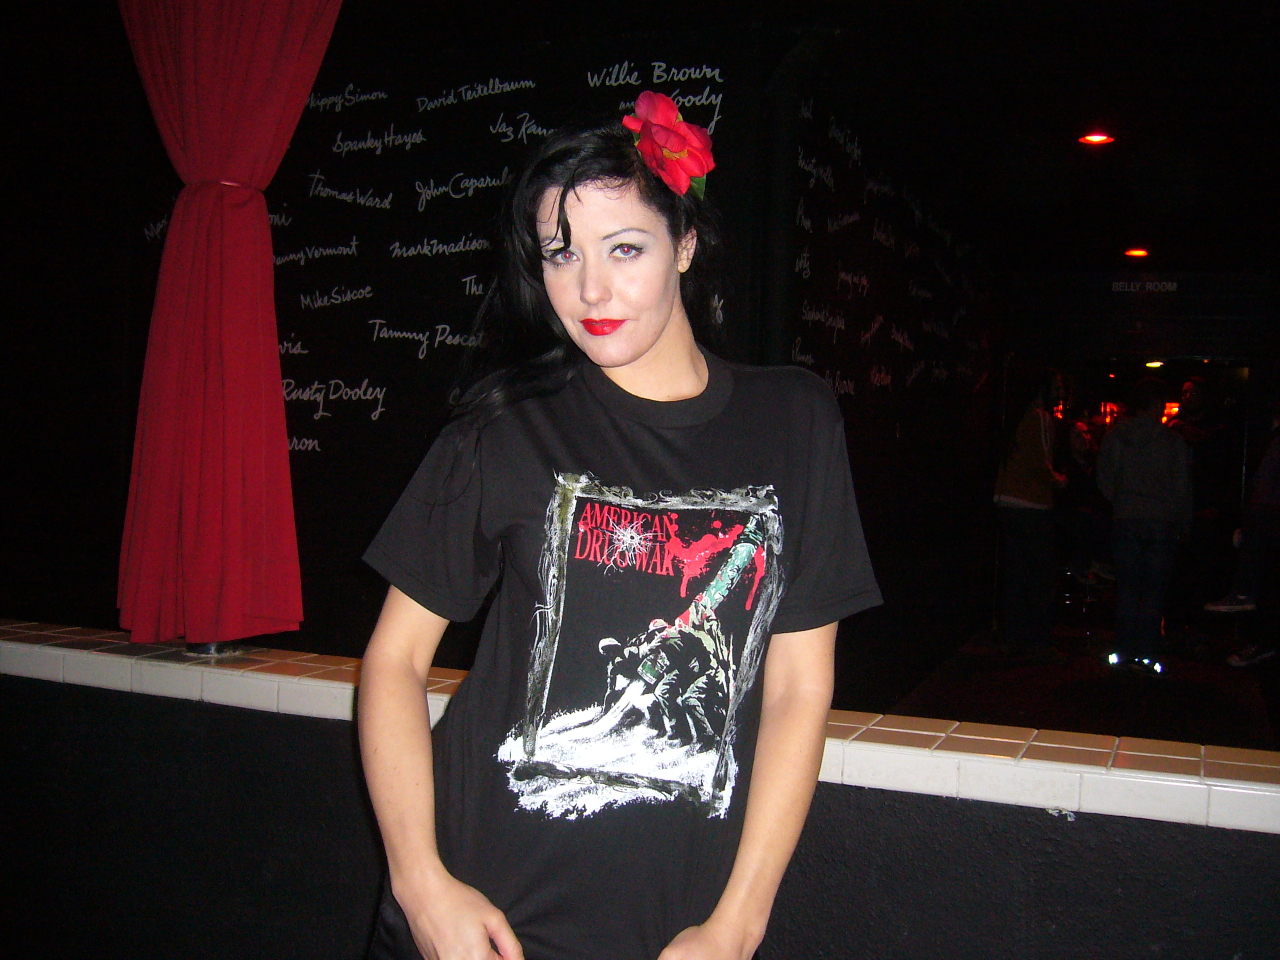 Mary Jane at the Comedy Store on the Sunset strip - wearing ADW shirt.